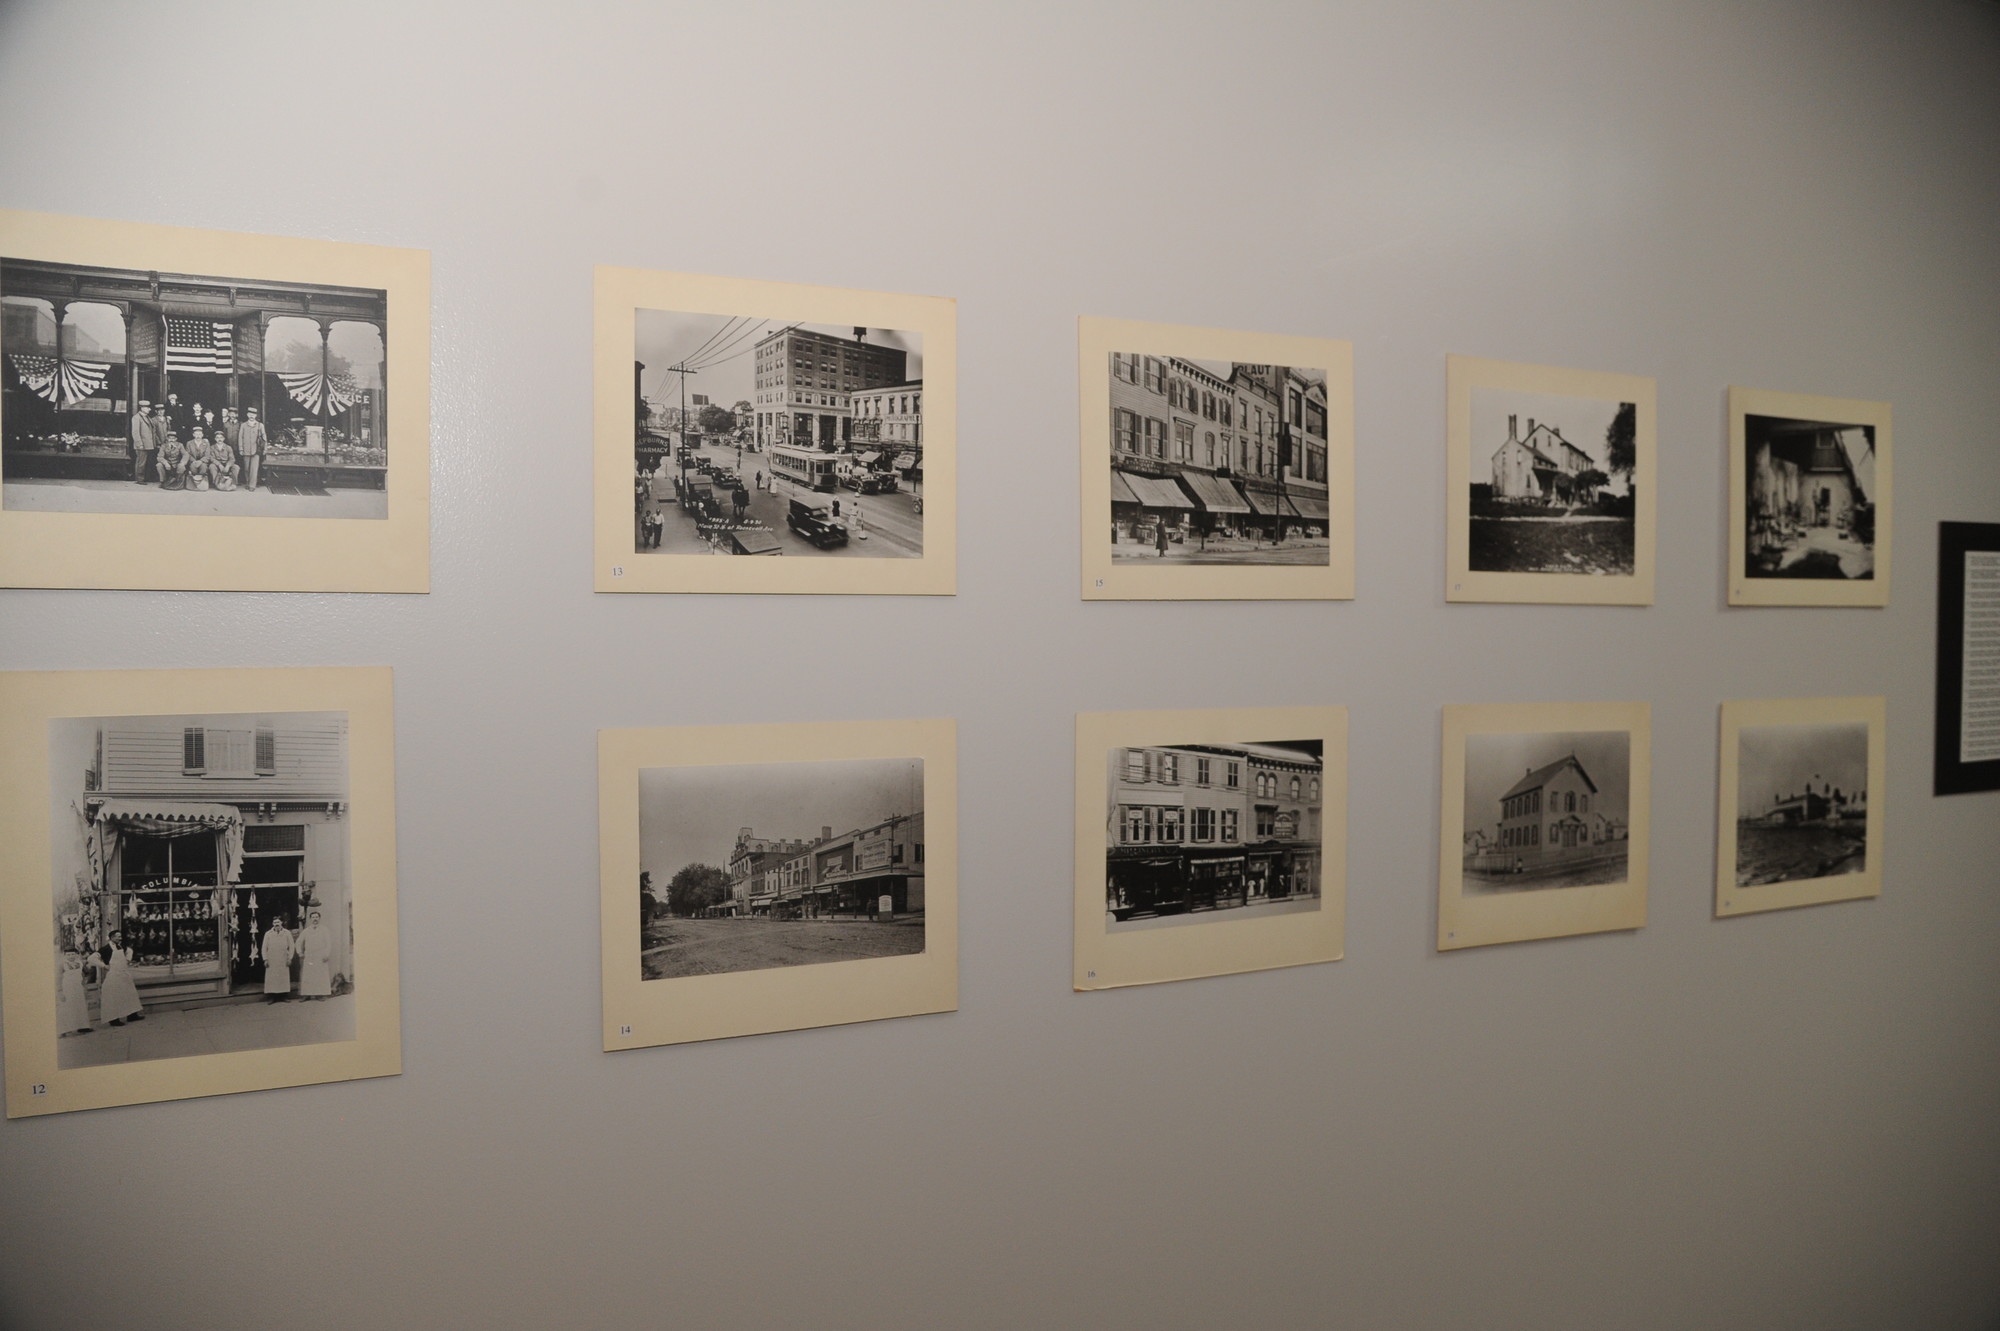 Vintage photographs of Long Island are on display at the exhibit.